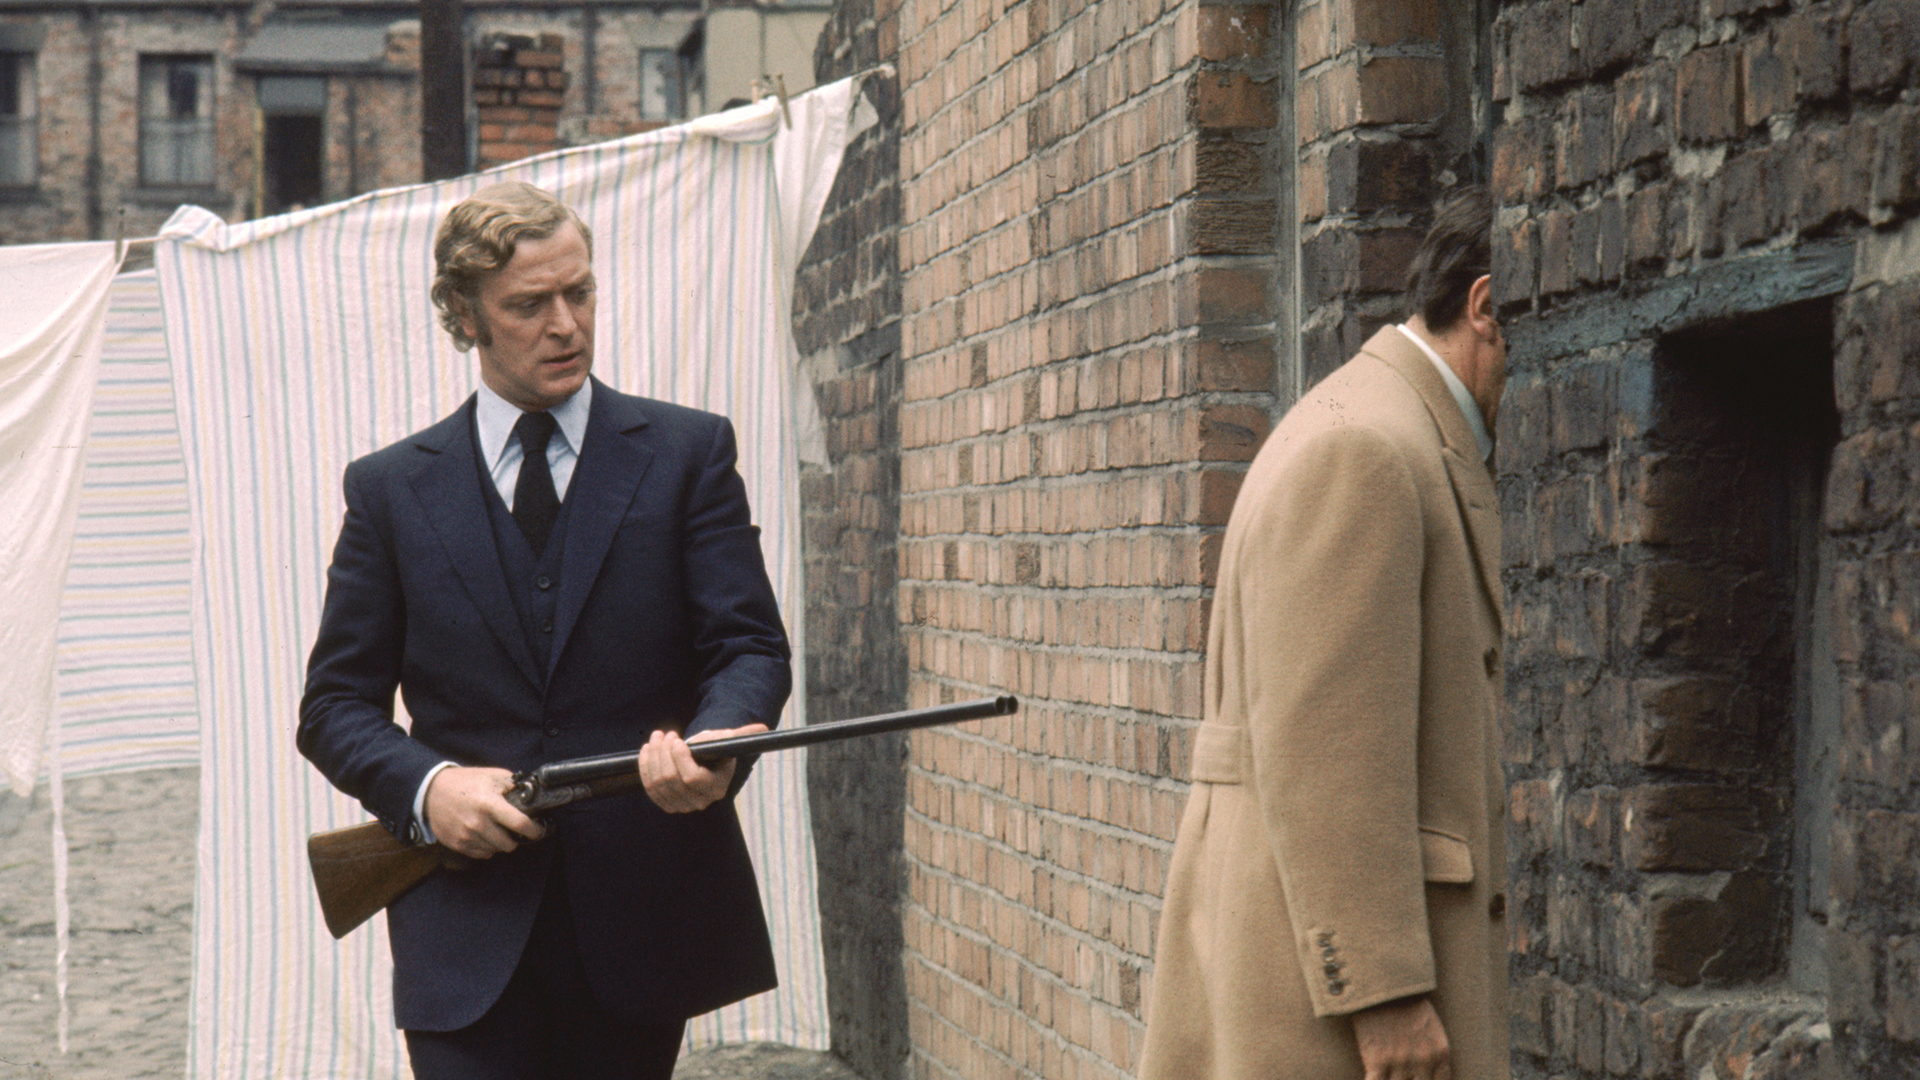 Michael Caine in Get Carter